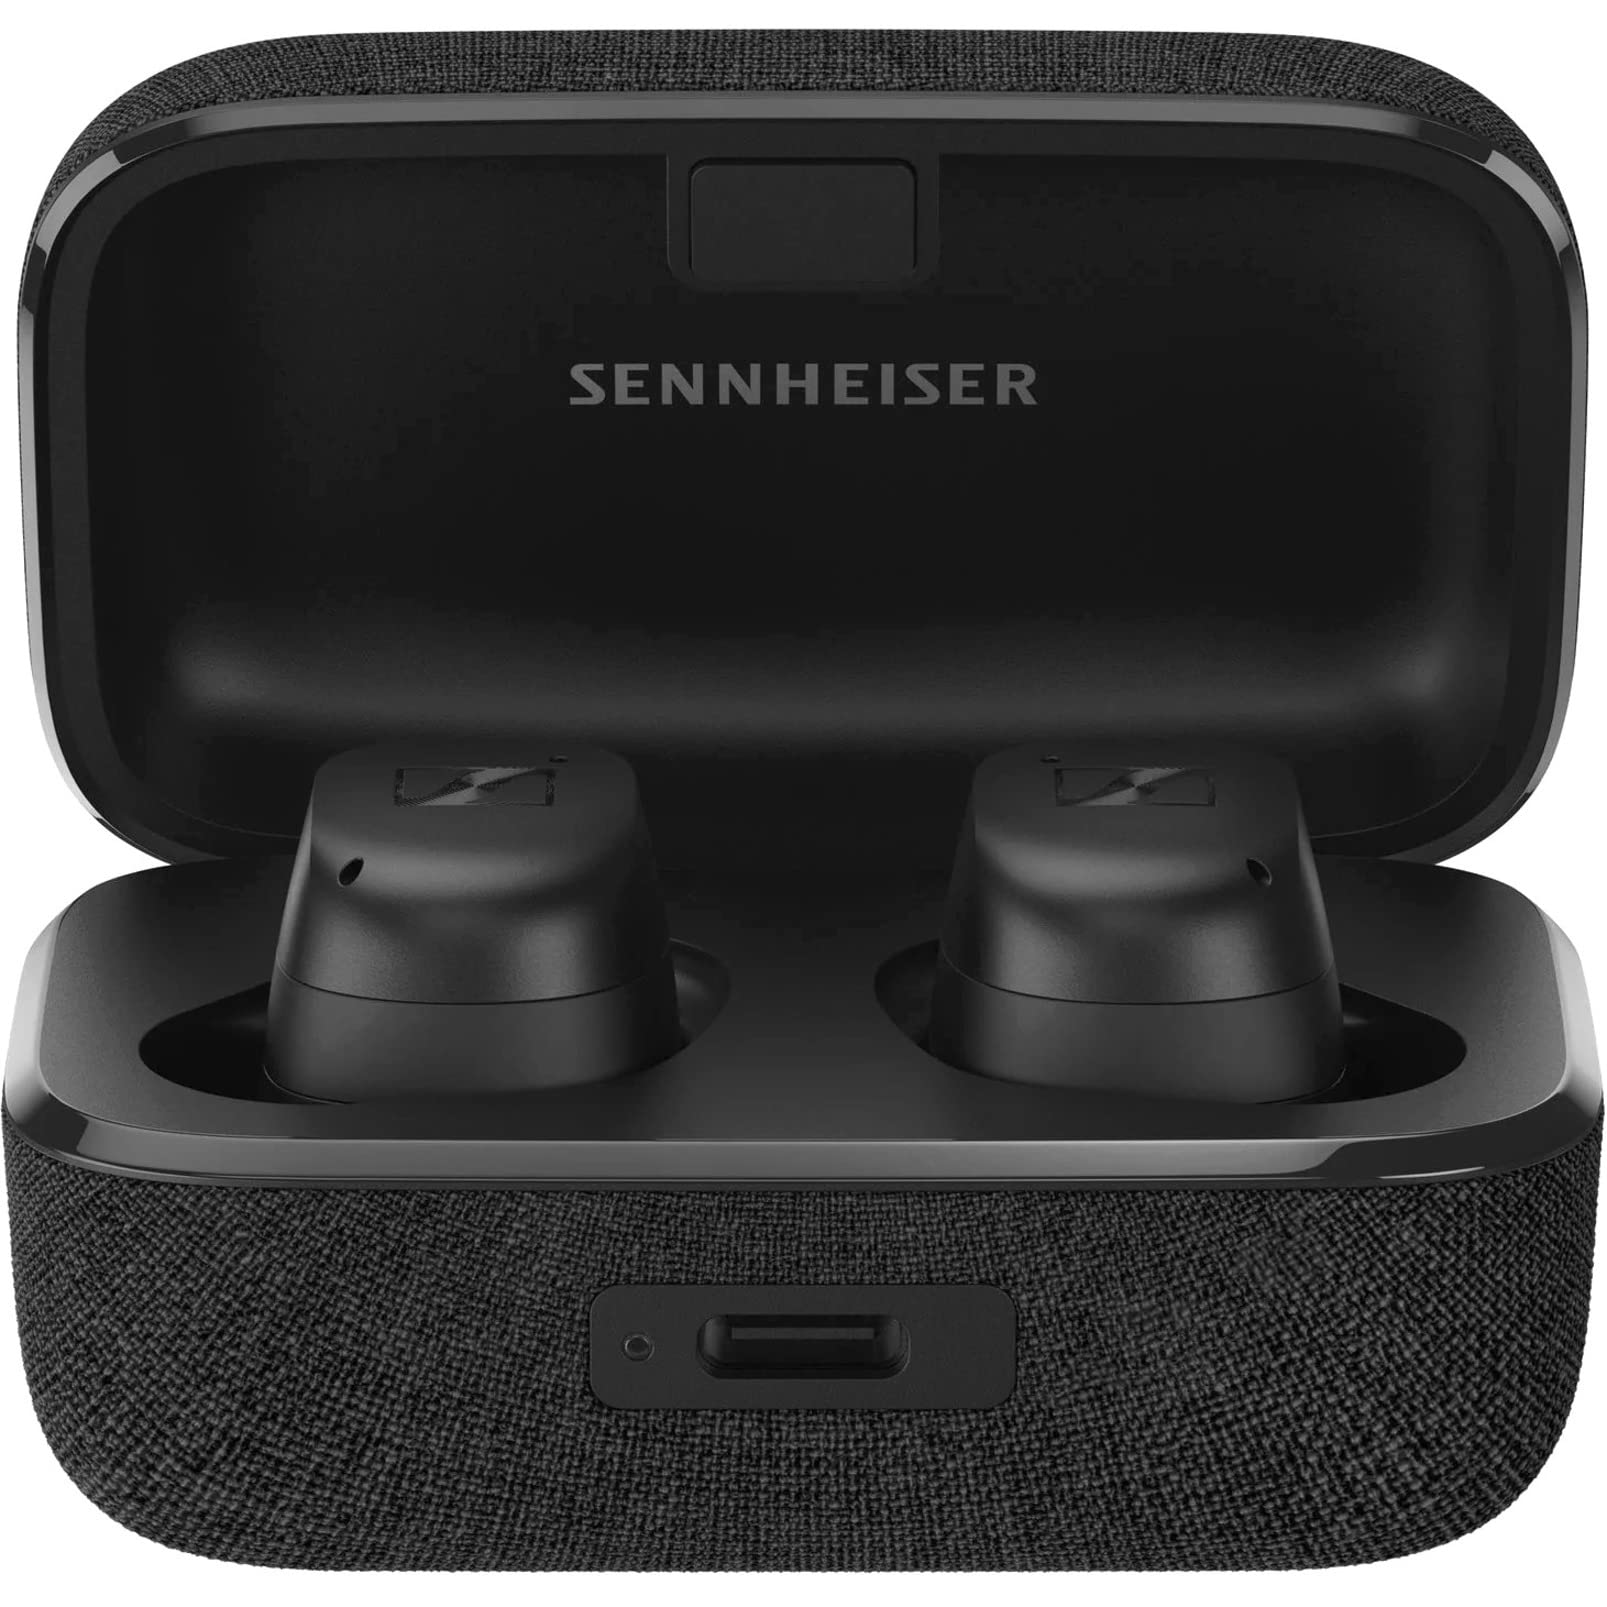  Sennheiser Consumer Audio Sennheiser MOMENTUM True Wireless 3 Earbuds -Bluetooth In-Ear Headphones for Music and Calls with ANC, Multipoint connectivity , IPX4, Qi charging, 28-hour Battery Life Compact...